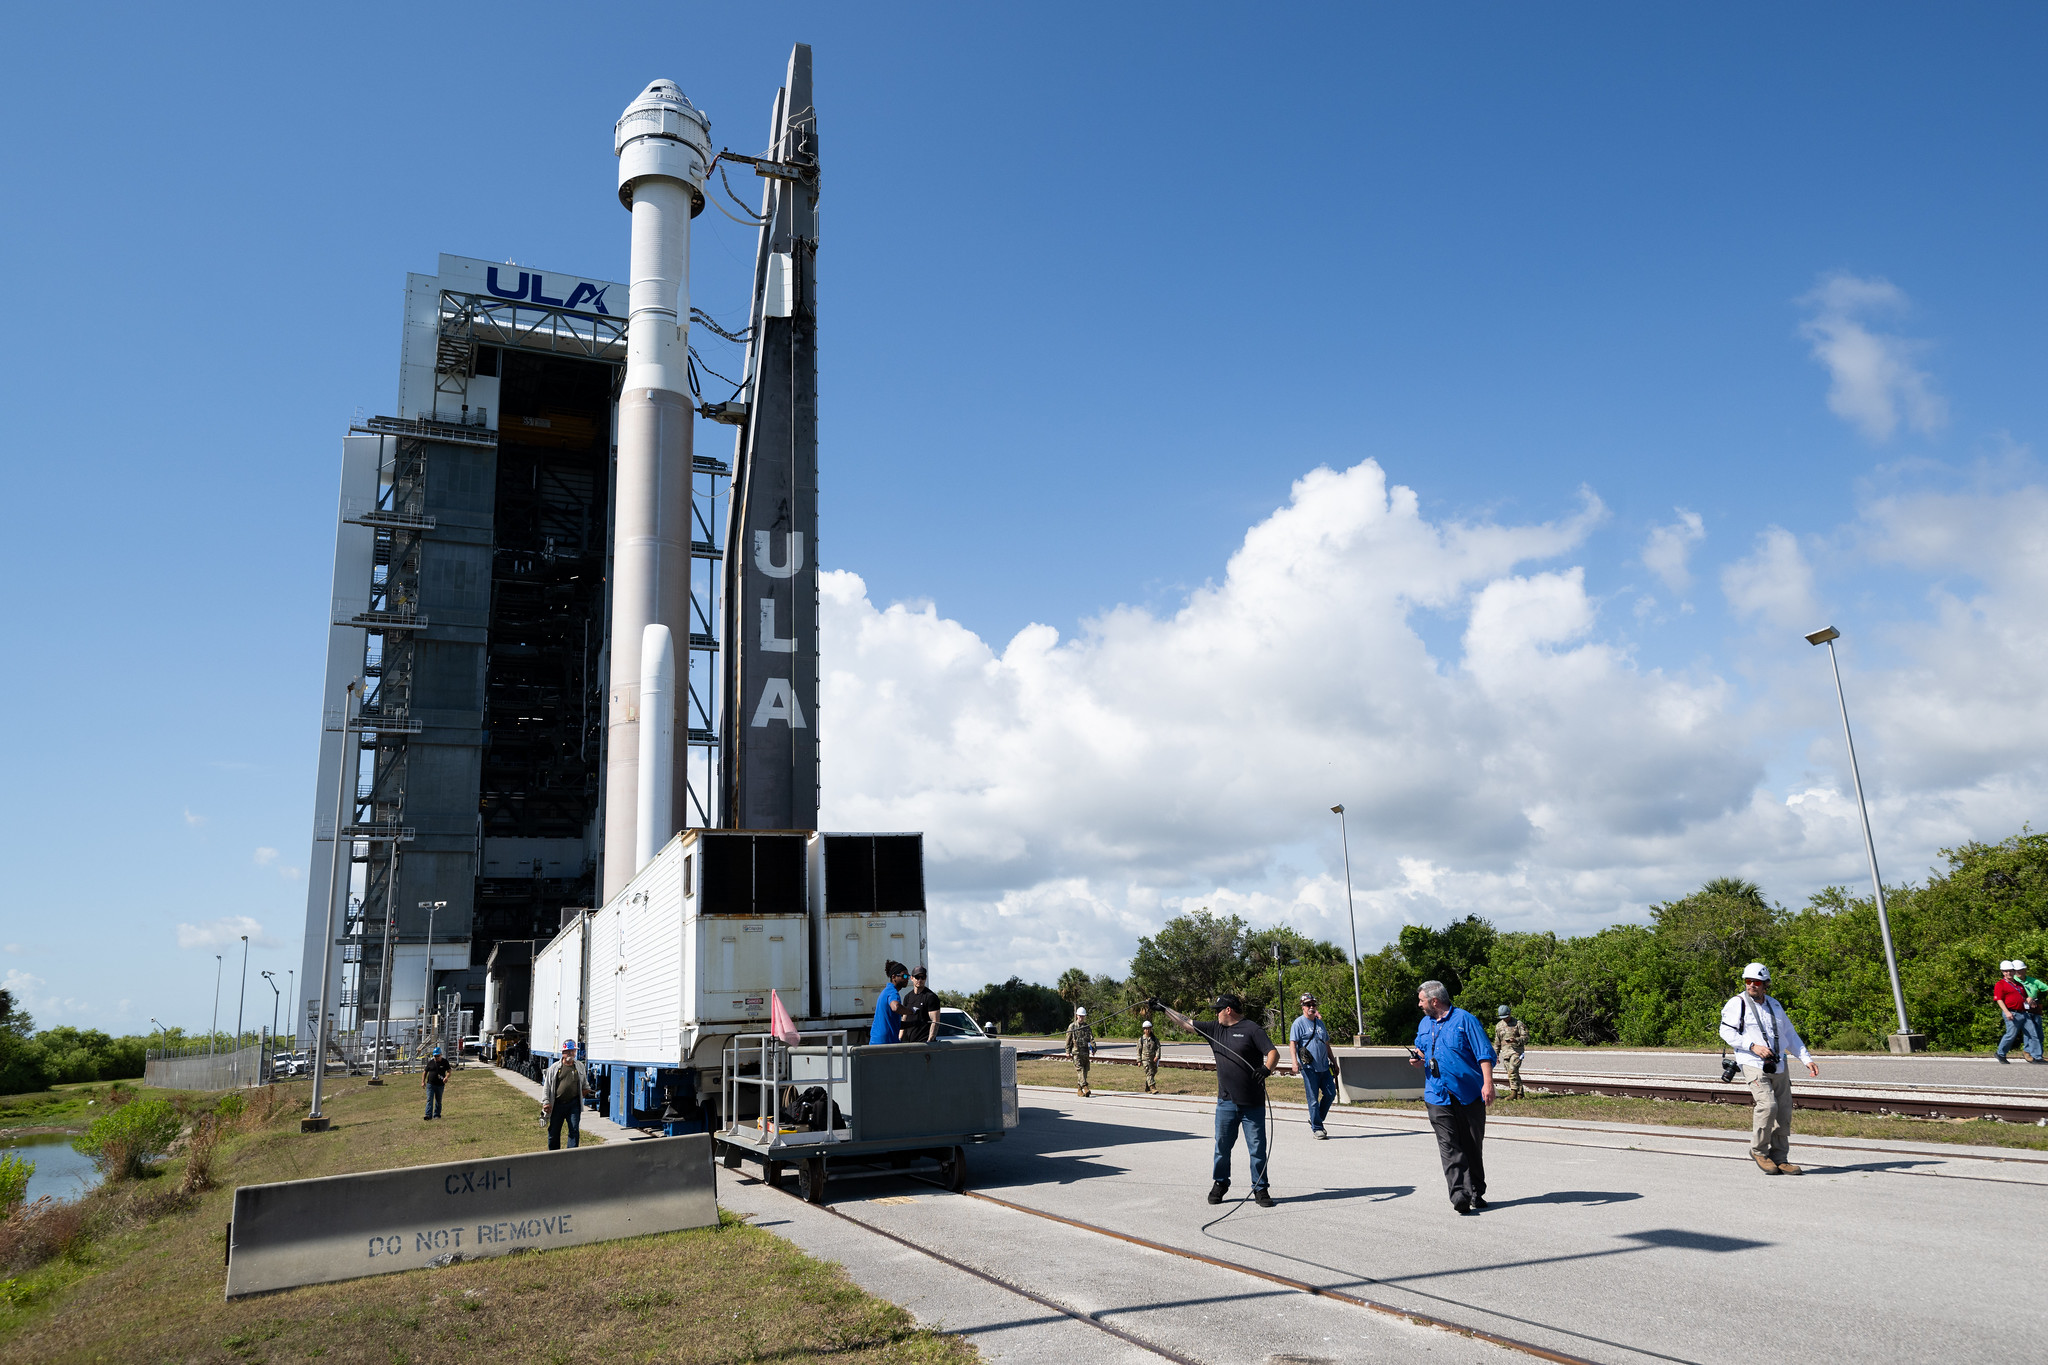 The Starliner launch was delayed to mid-May